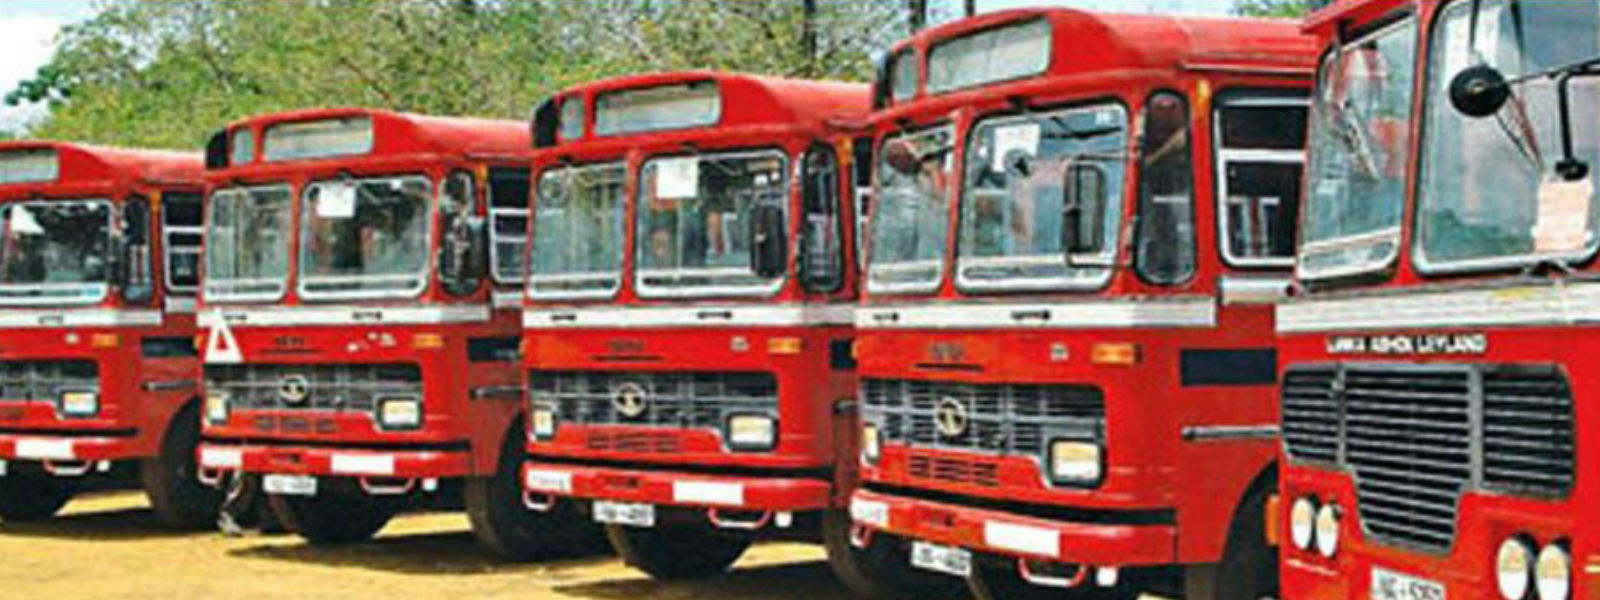 Bus services to return to normalcy from Monday (30): SLTB